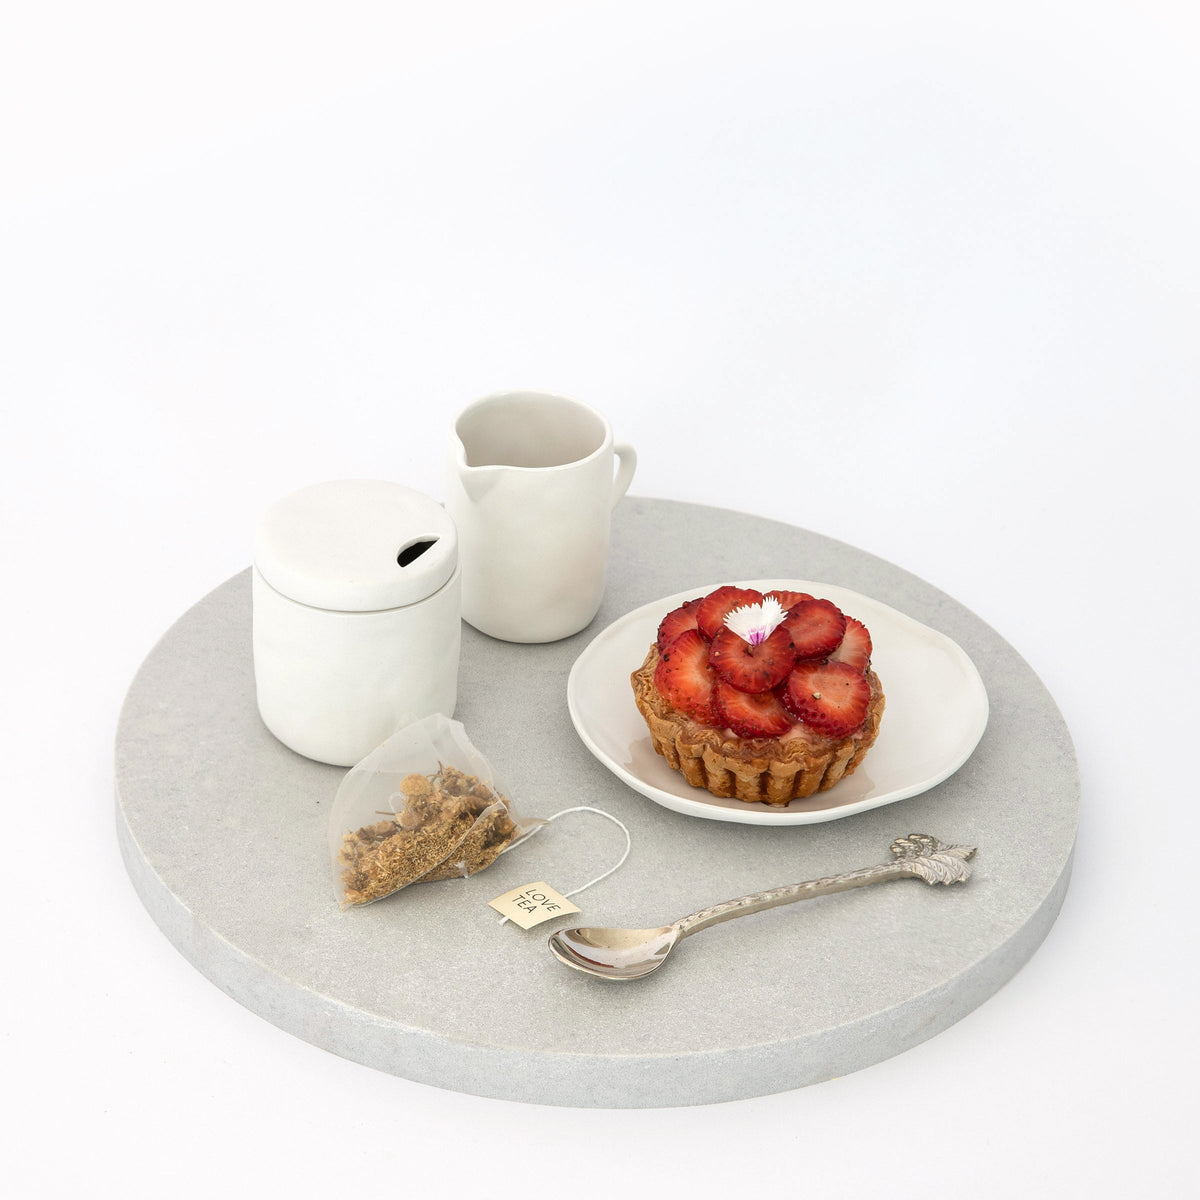 Large Quartz Round Serving Platter in Caeserstone Airy Concrete by Aureliia Collection. This serving 30cm round platter is styled with strawberry pastry tart and clay tea set.  An excellent home decor addition for the avid entertainer. Gift ideas for someone who has everything.